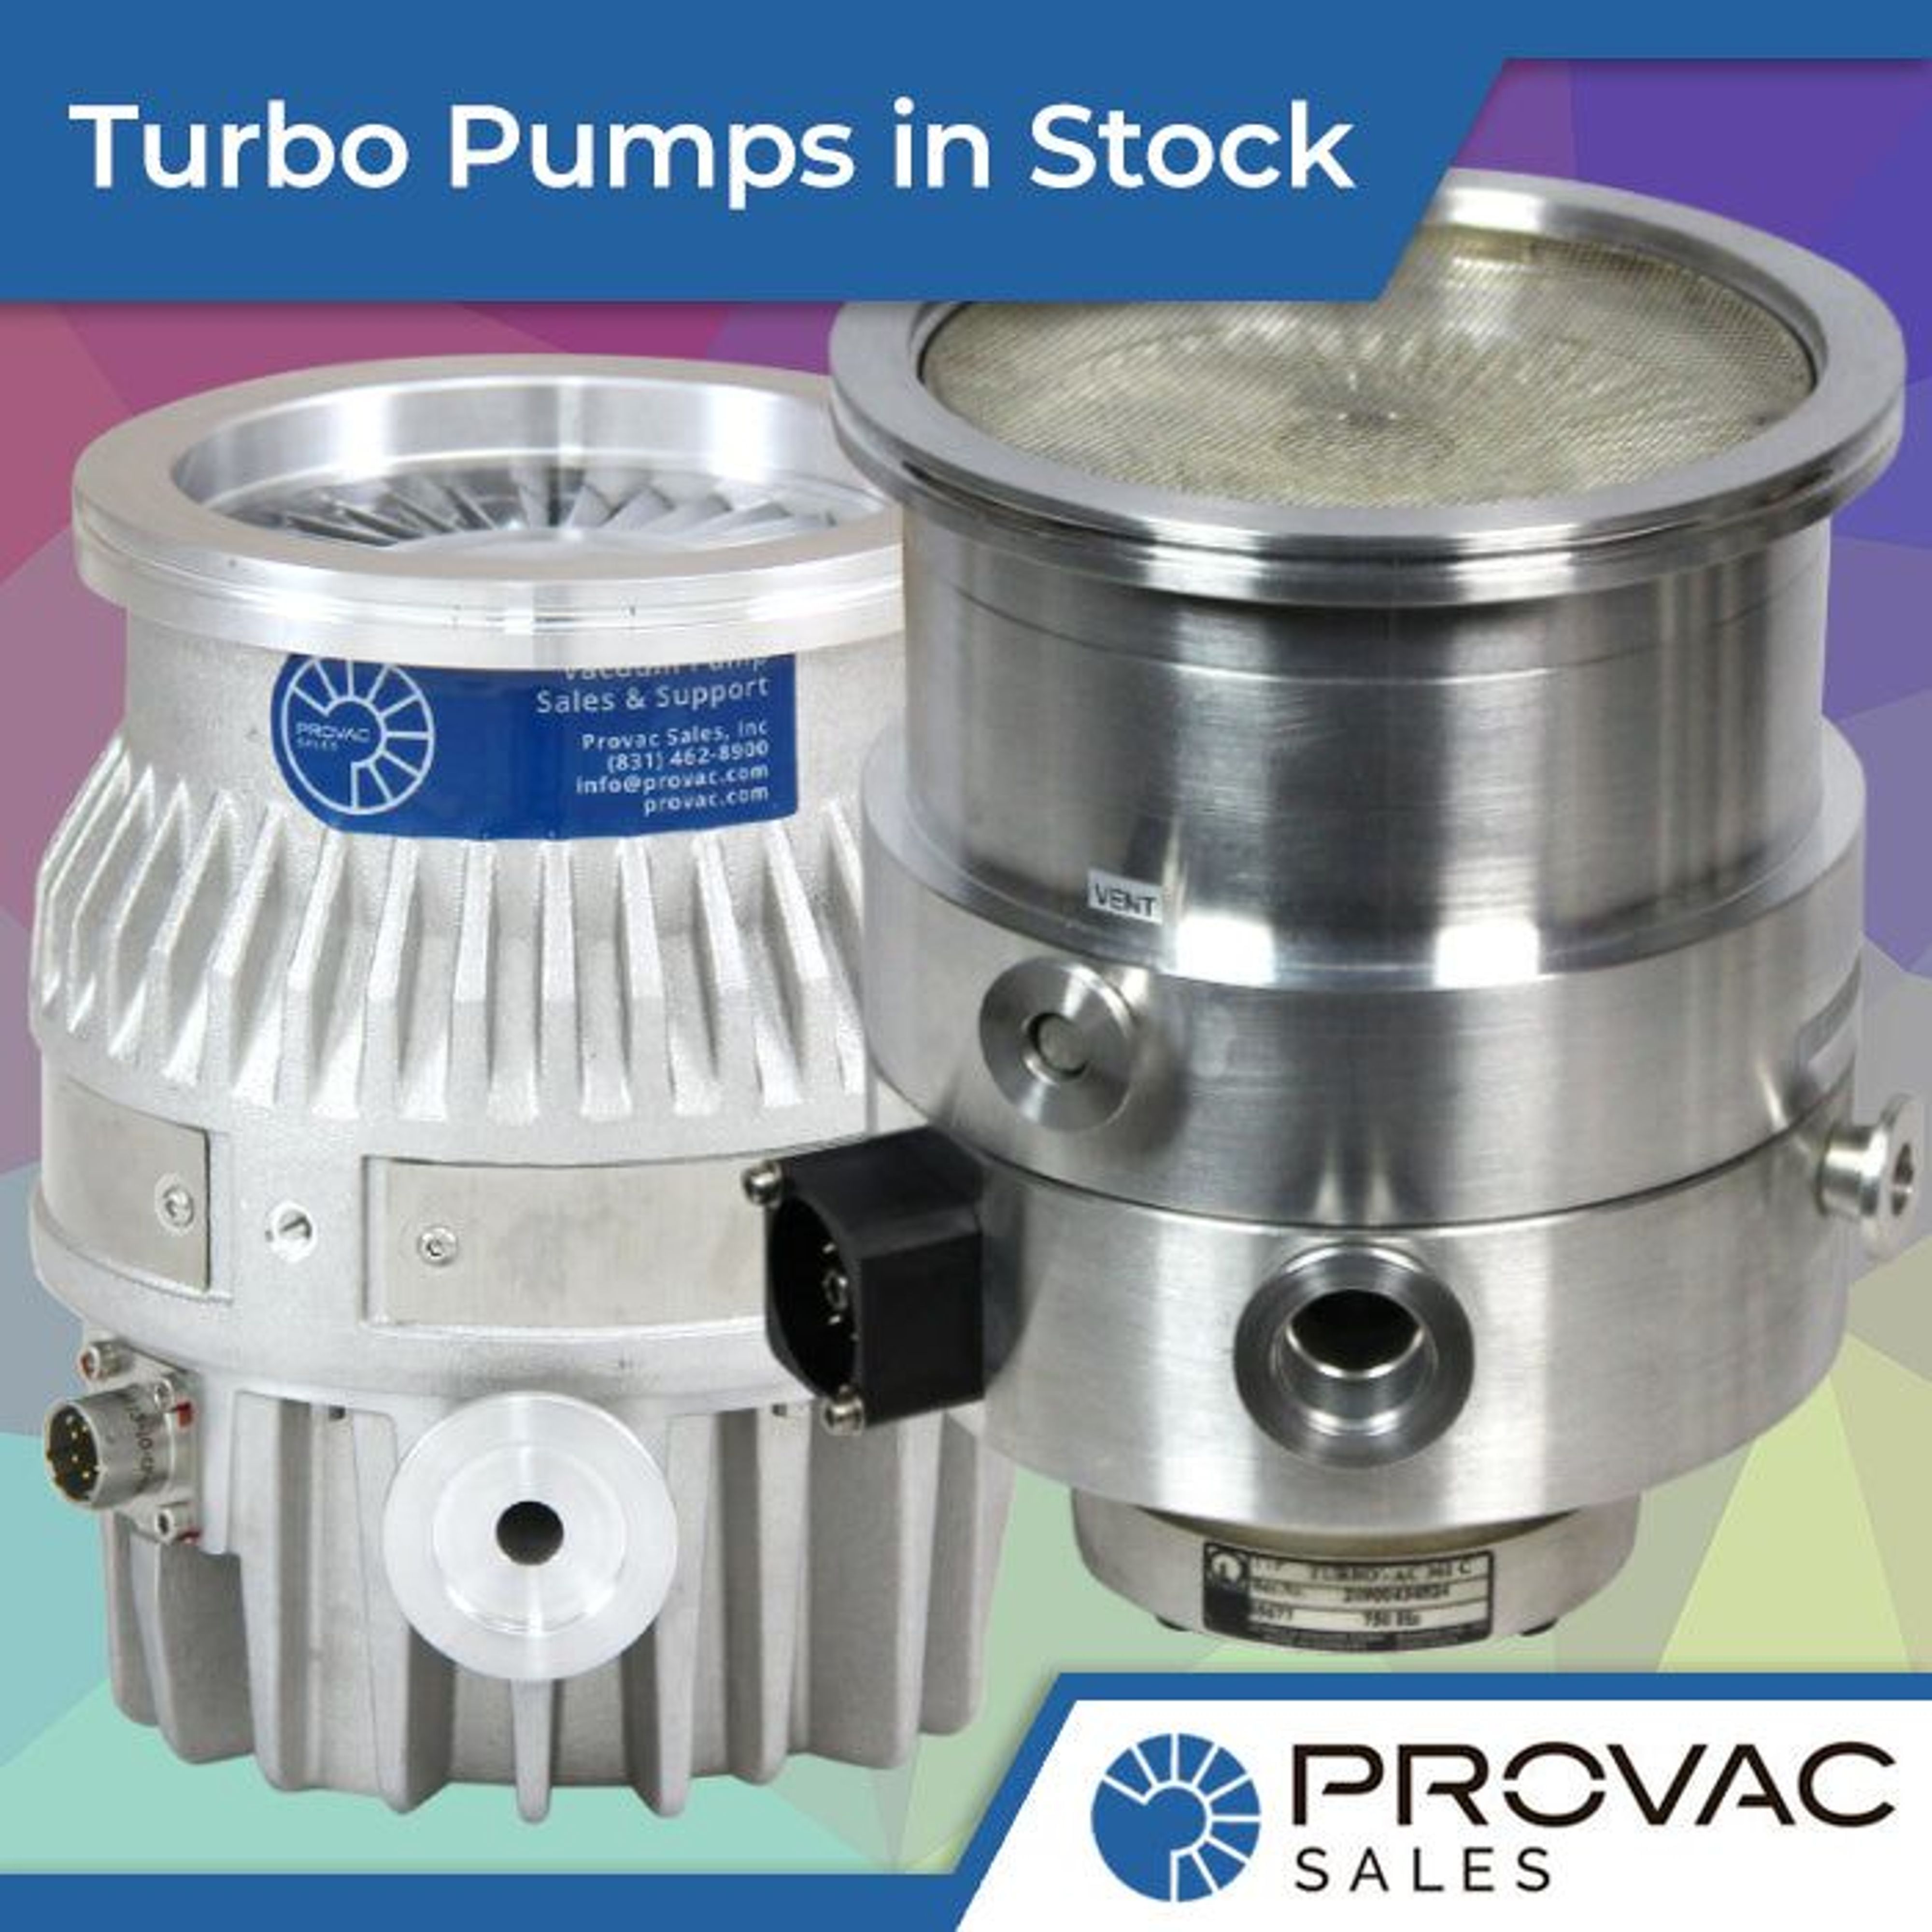 Varian TV-301 & Leybold TMP-361C Turbo Pumps In Stock Background